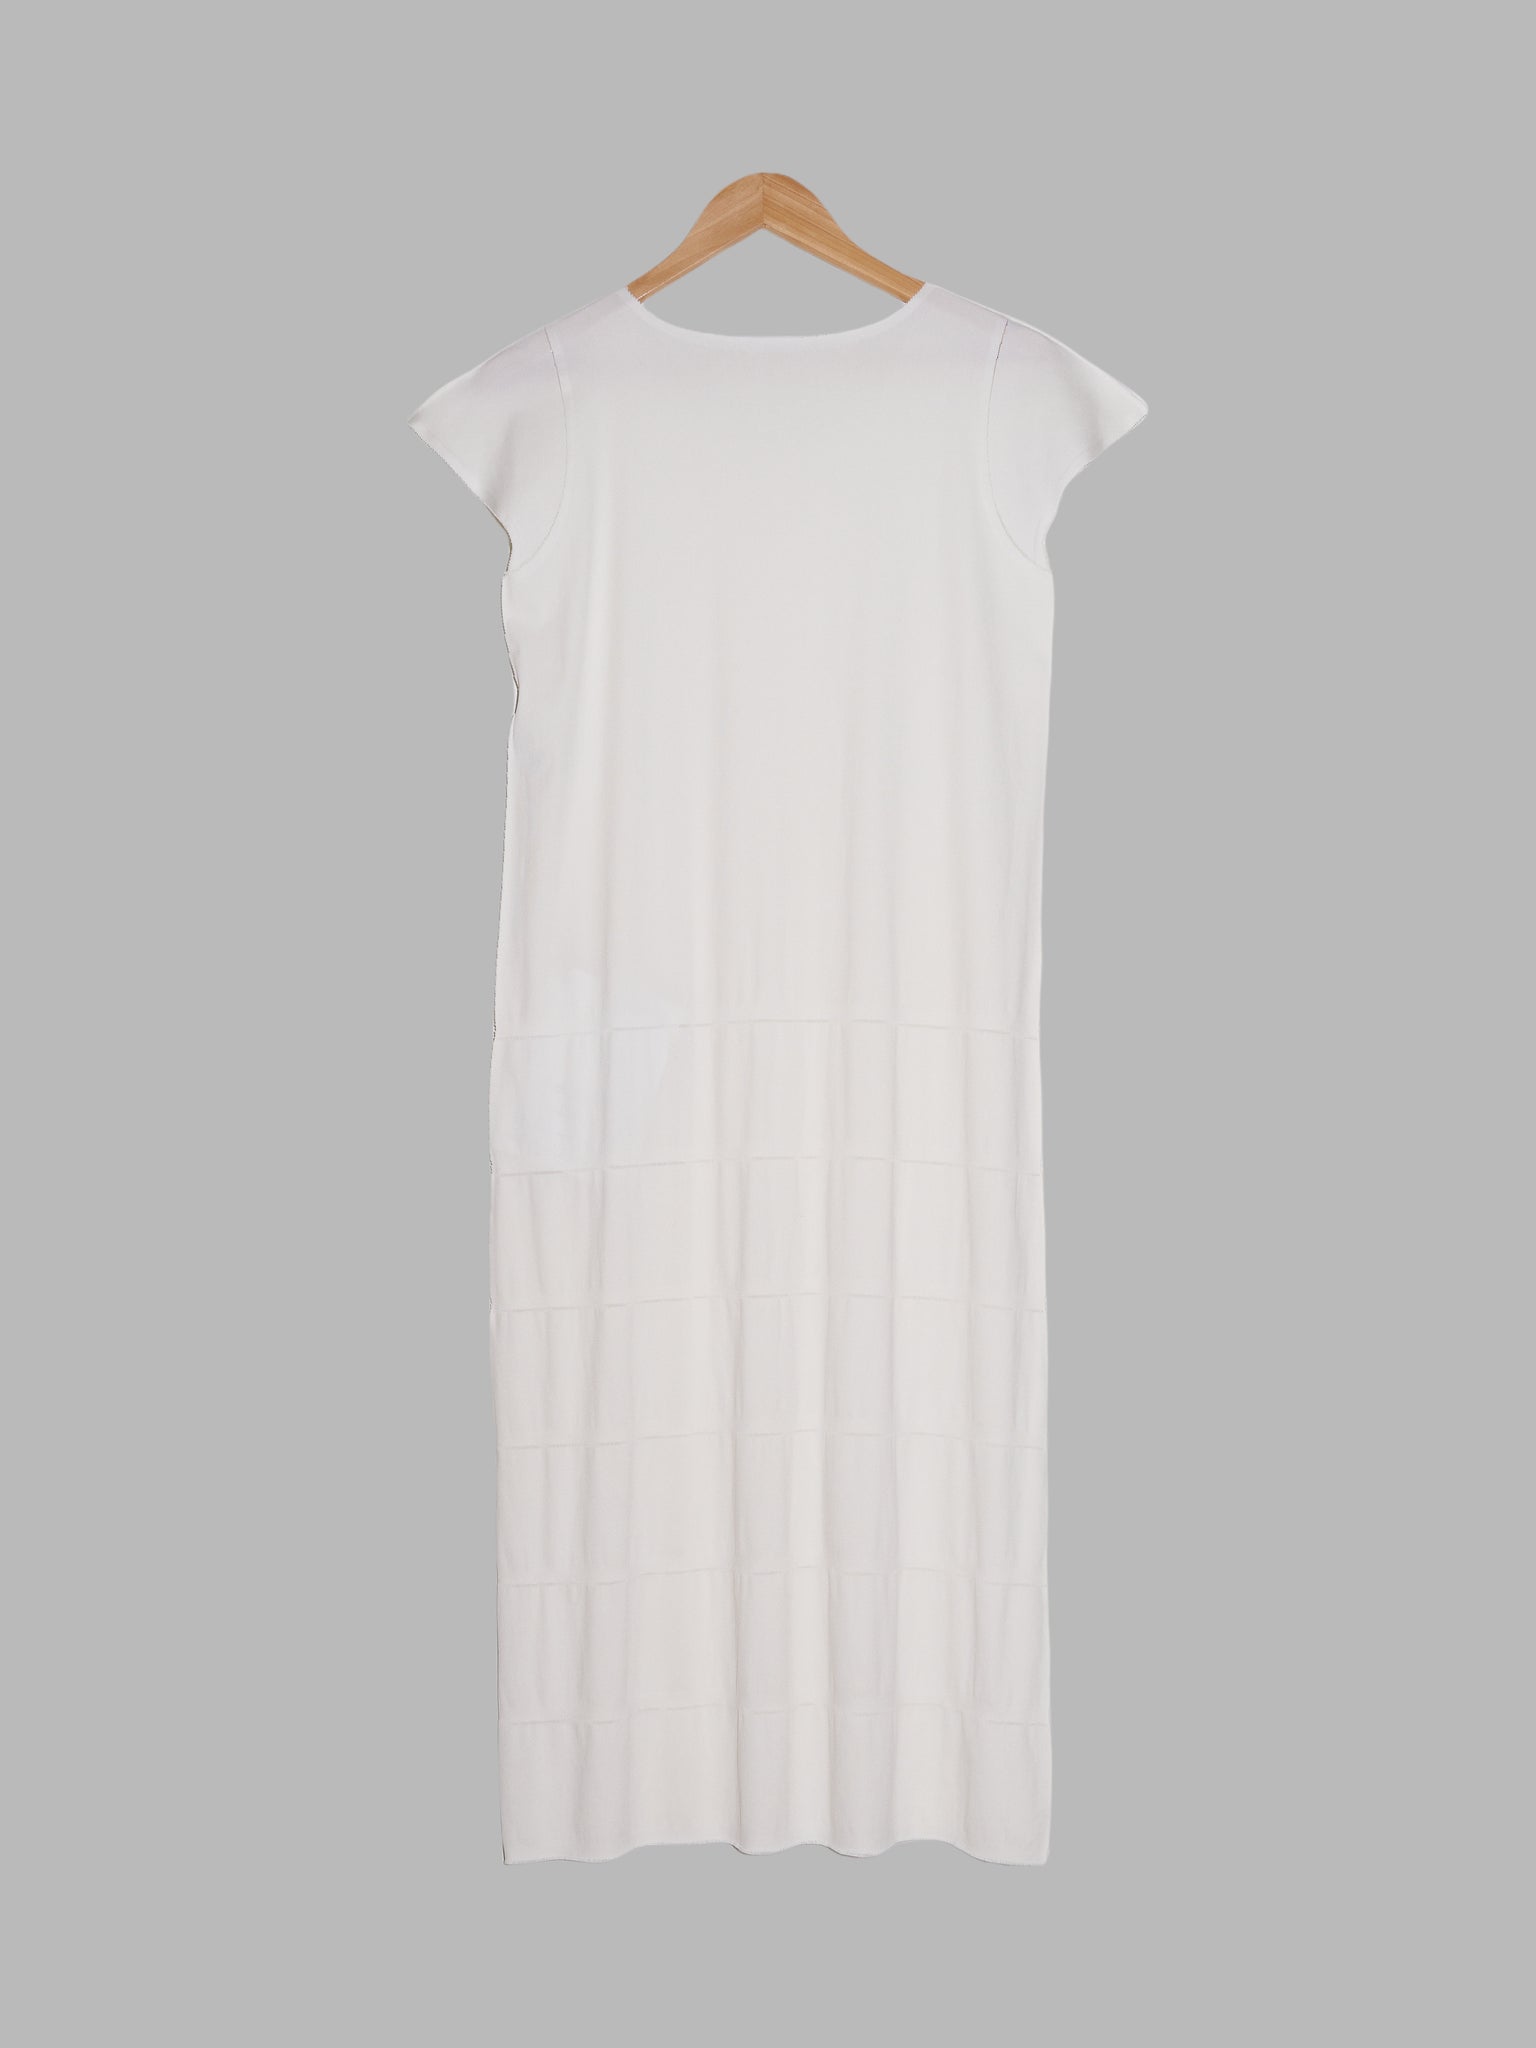 Issey Miyake A-POC Pleats Please off white short sleeve dress with cut lines